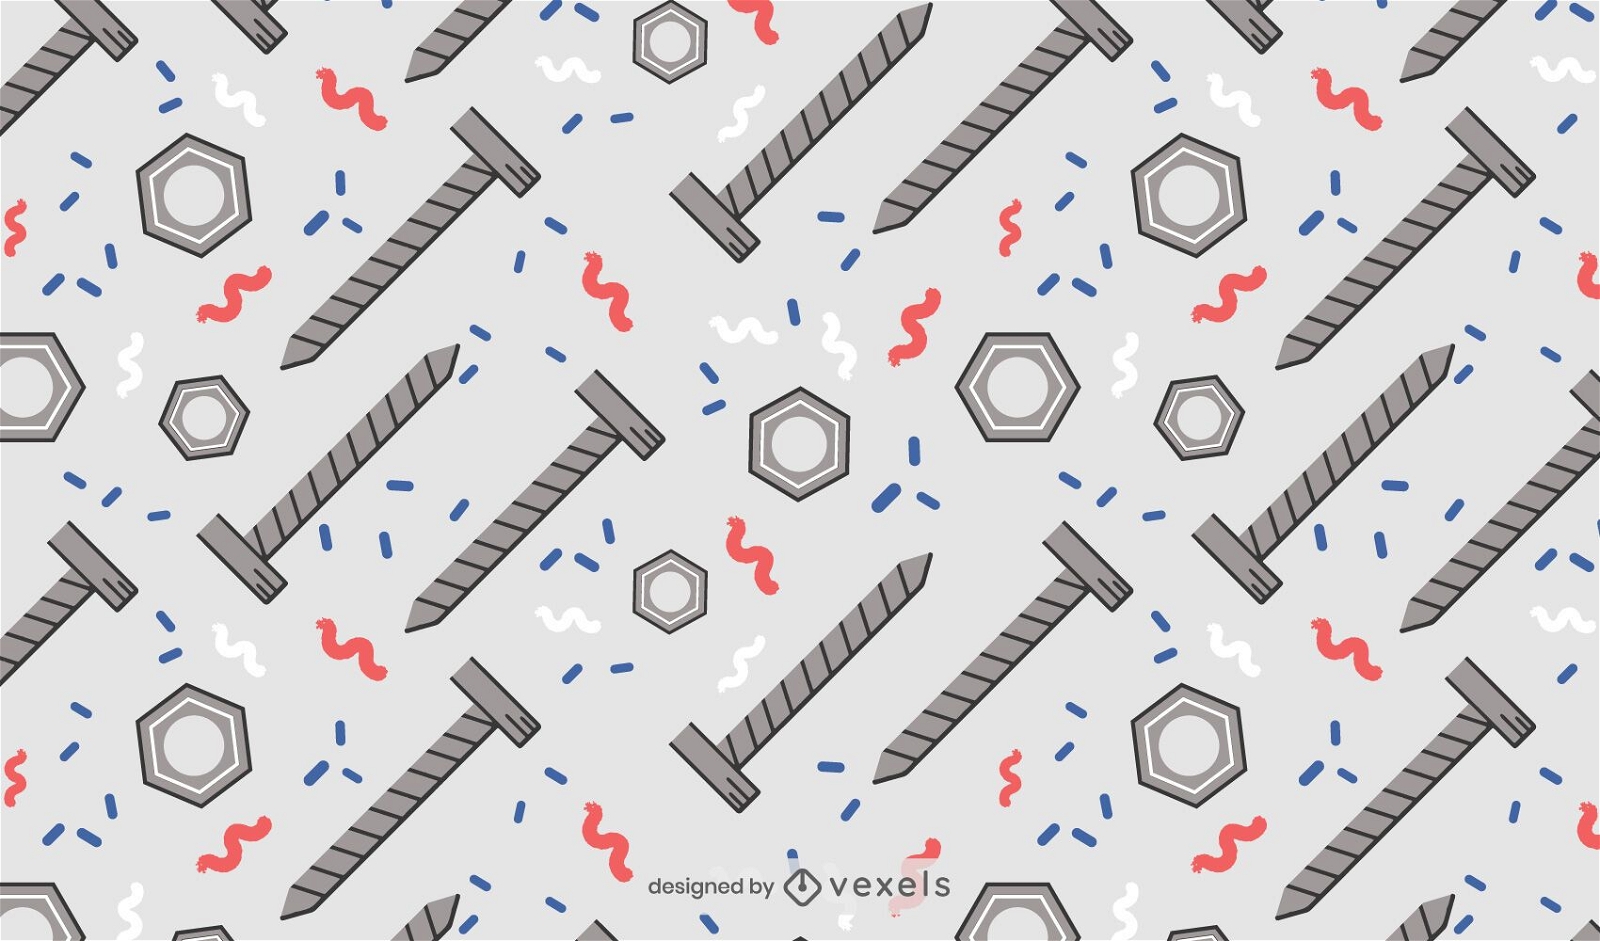 Nuts and bolts pattern design